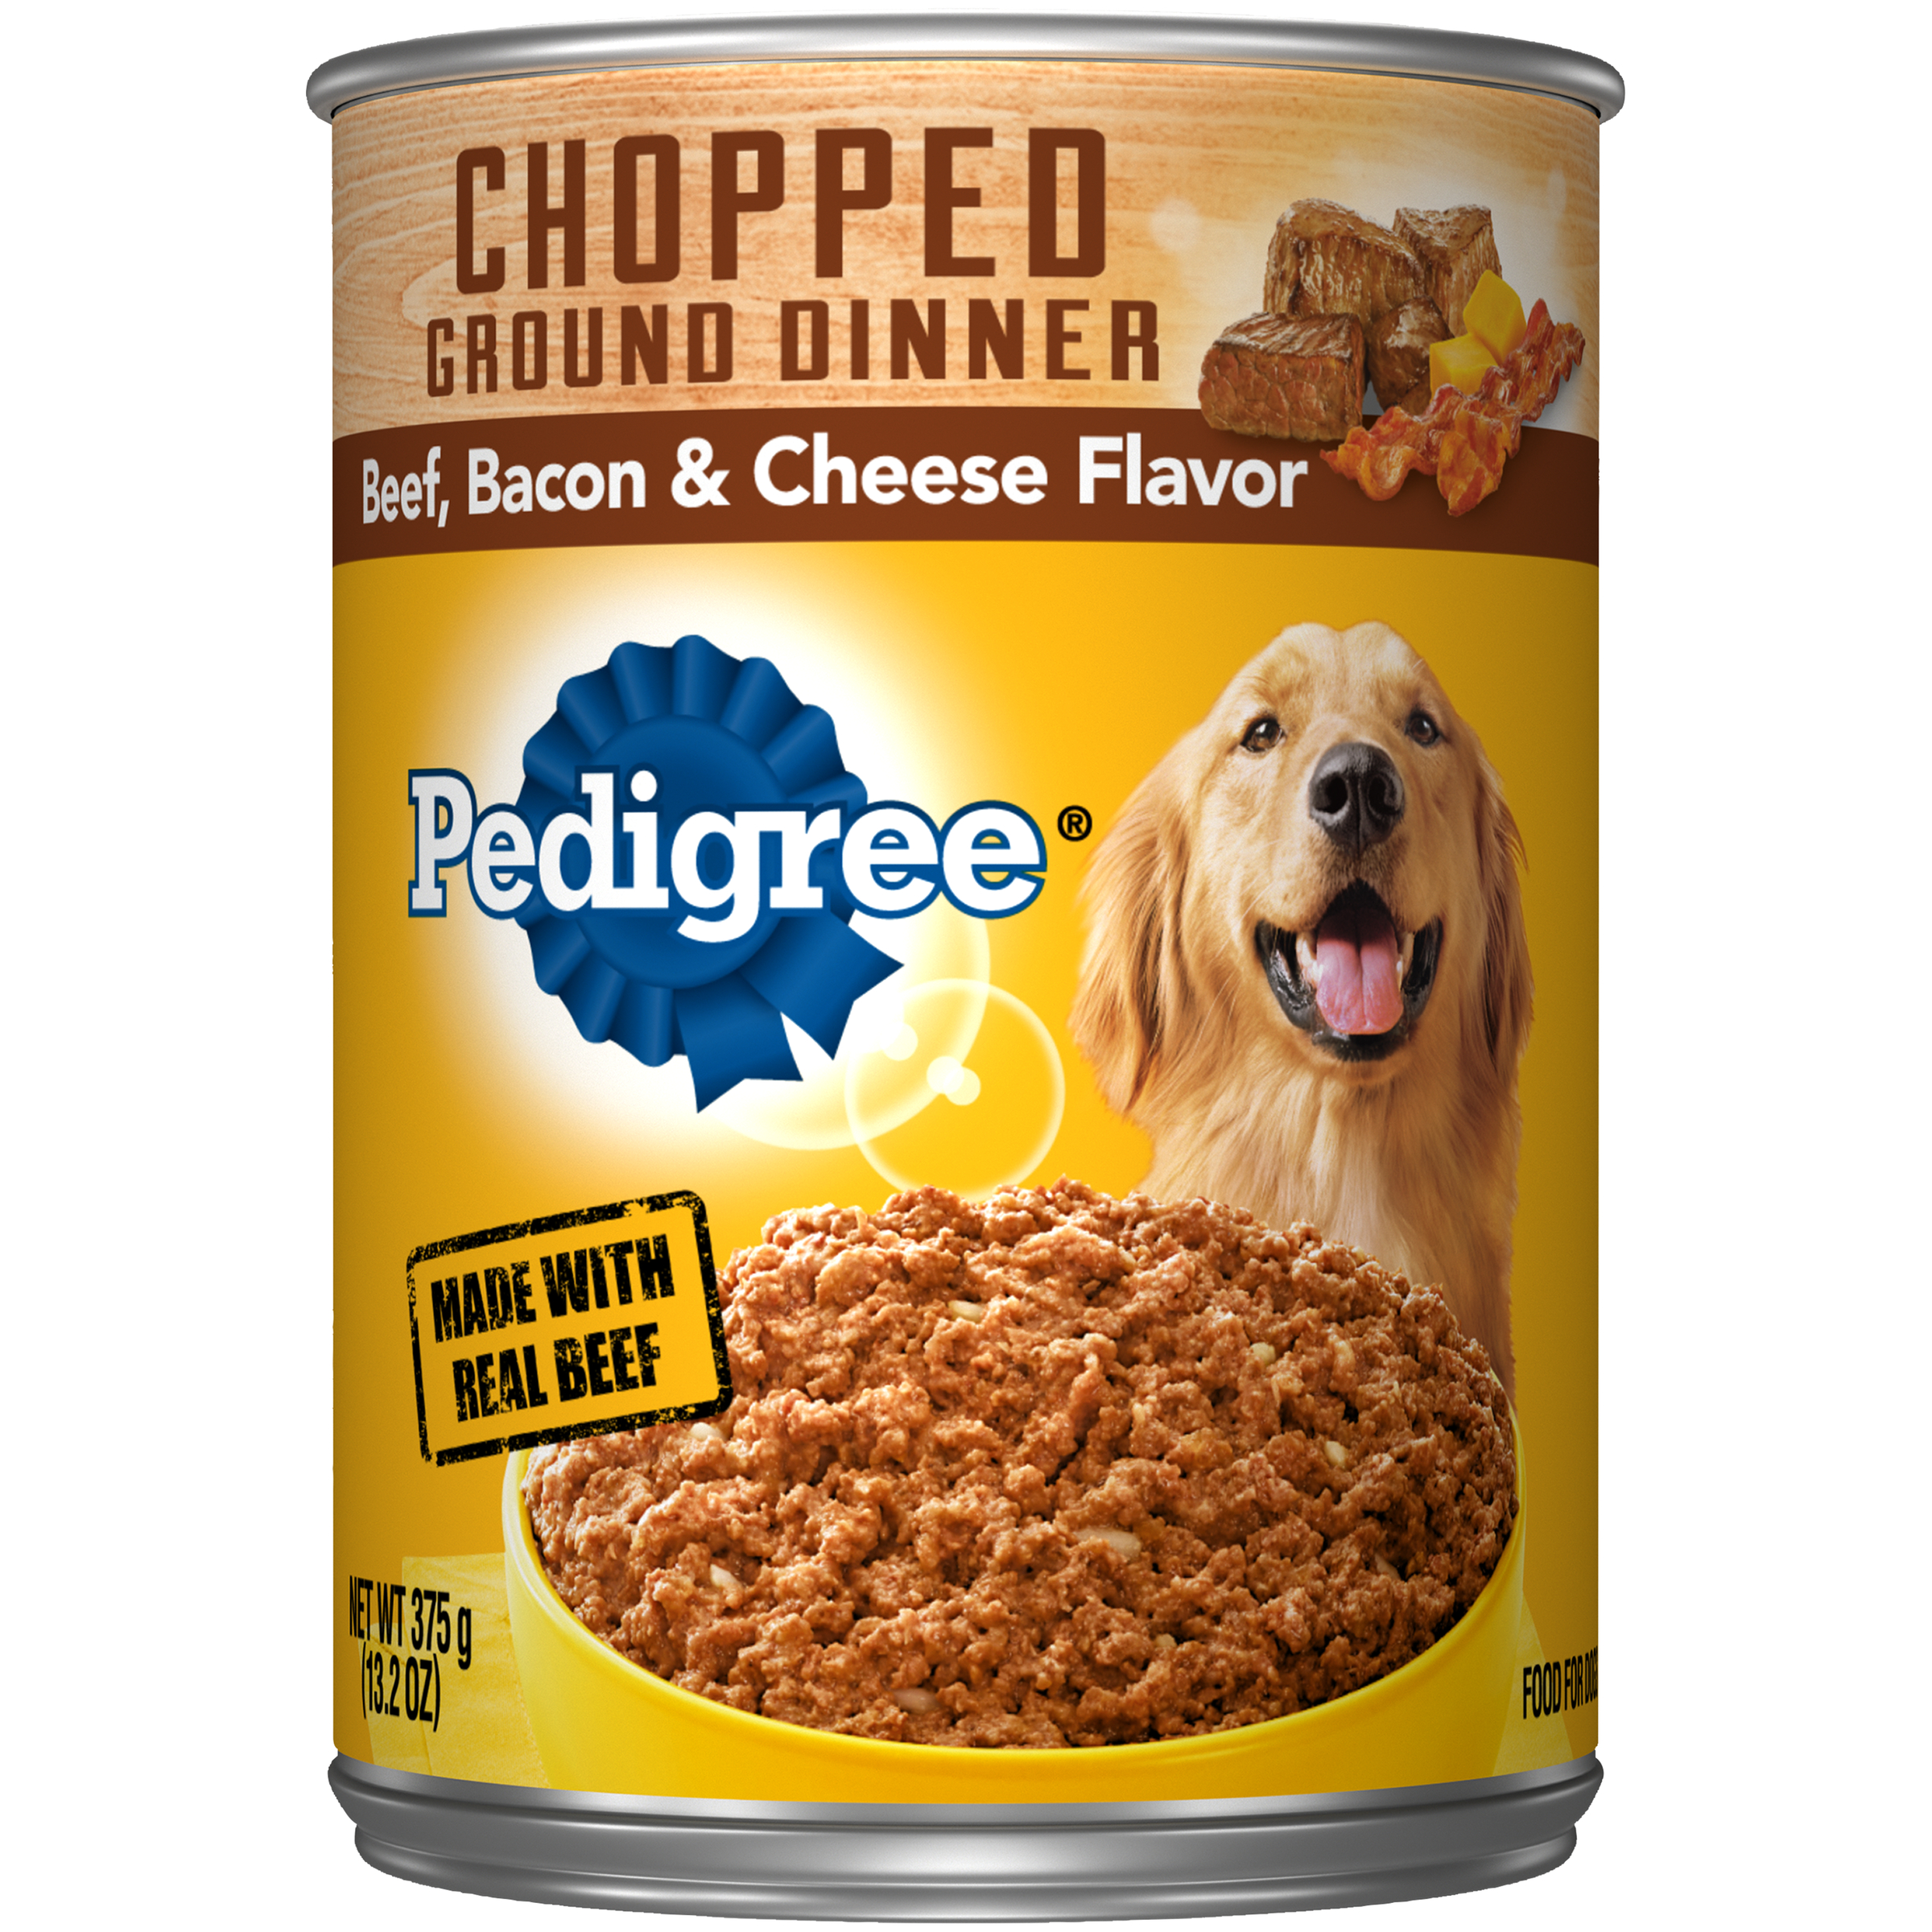 Pedigree Food for Adult Dogs, with Chunky Beef, Bacon & Cheese, 13.2 oz (375 g)